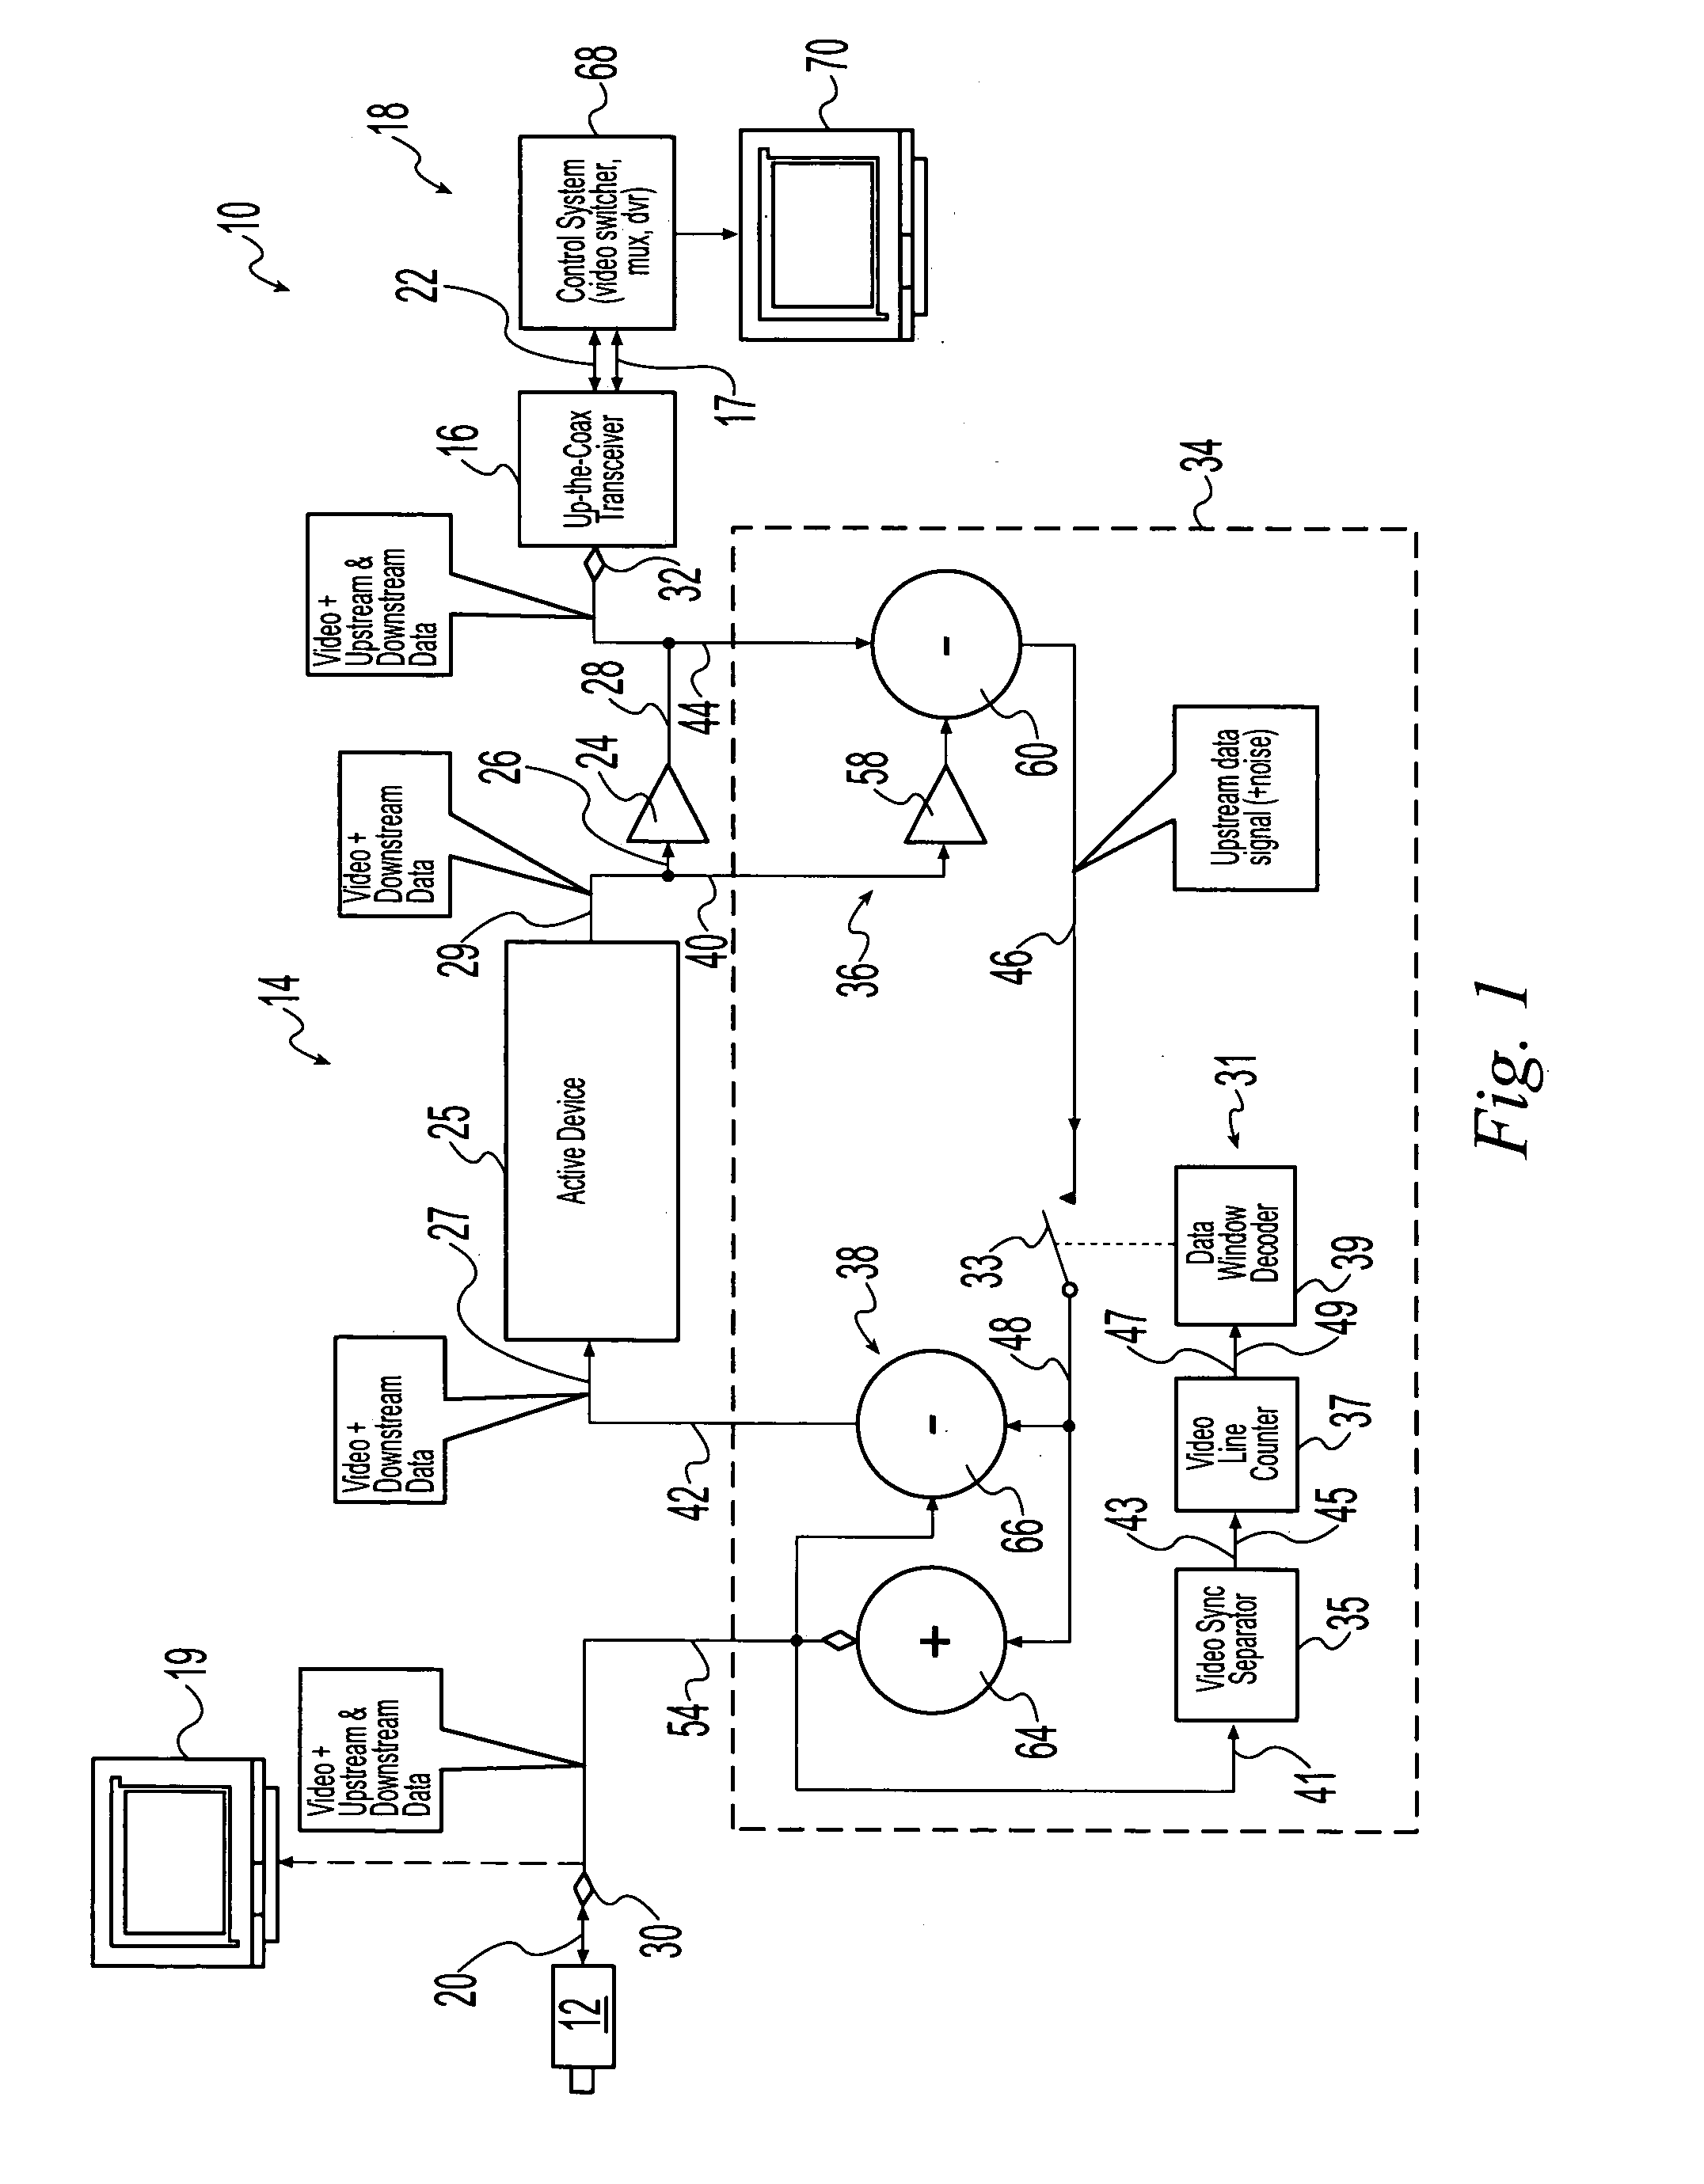 Upstream data bypass device for a video system